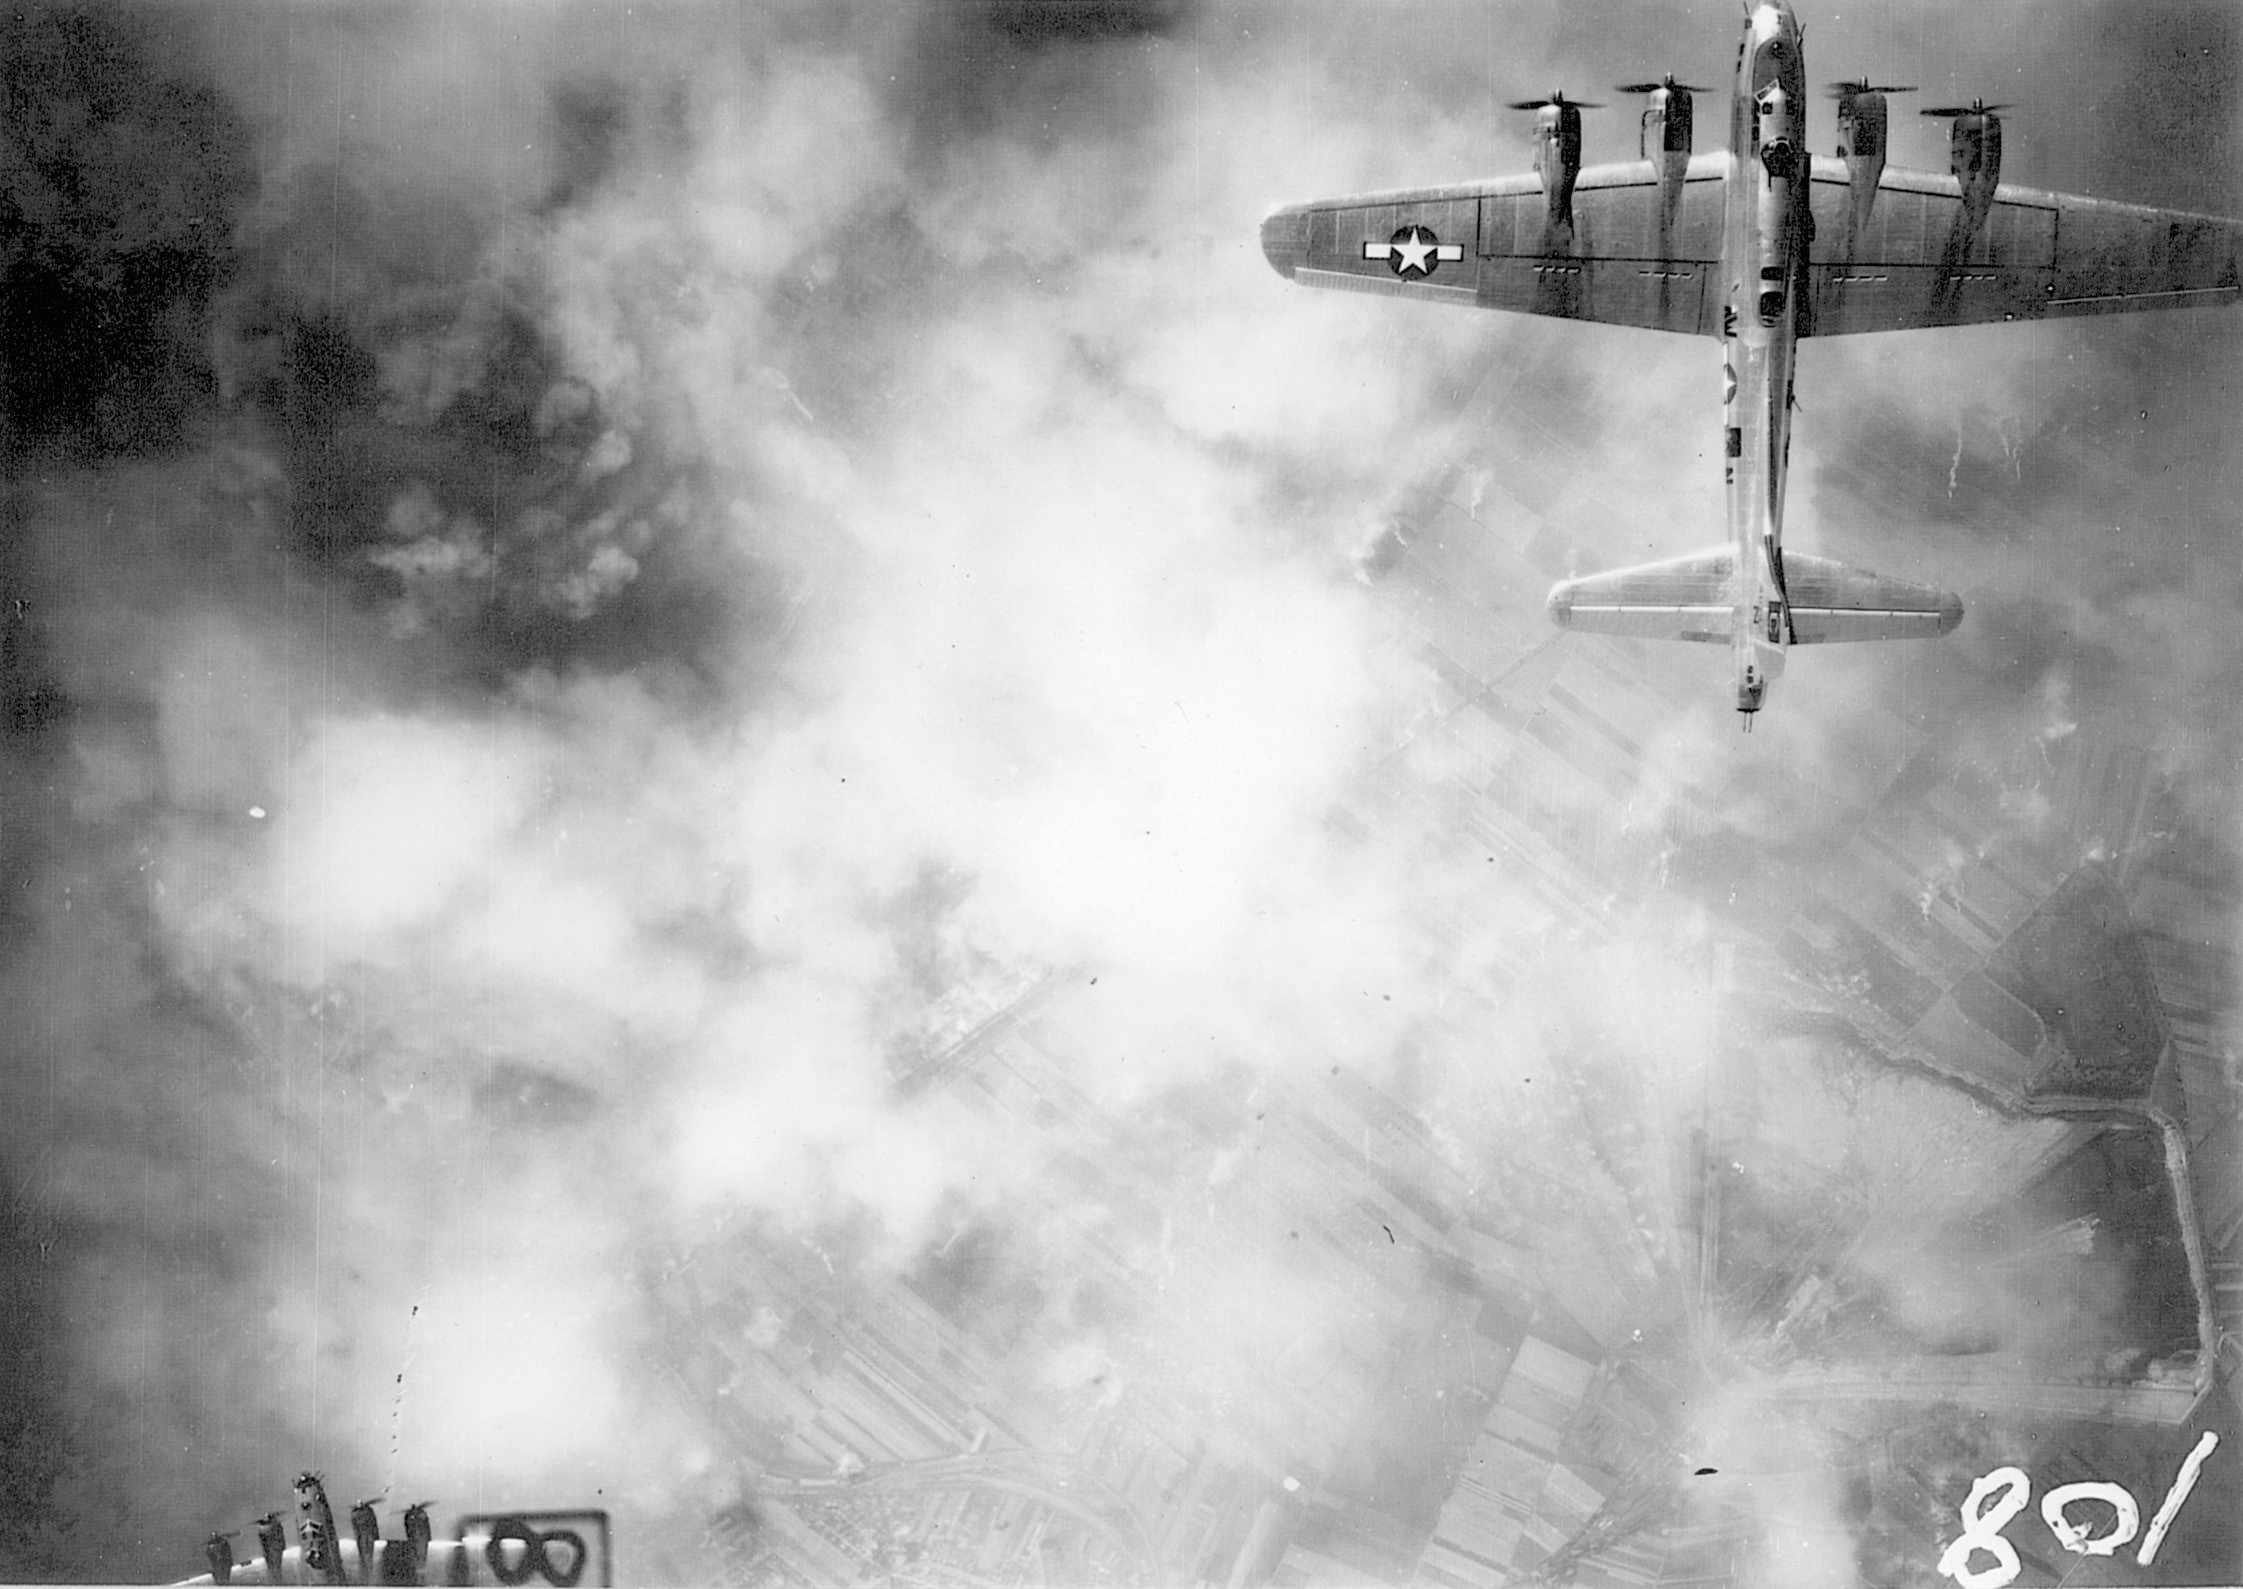 The Leuna Synthetic Oil Works at Merseburg, Germany, were subjected to intense Allied bombing on more than one occasion. A B-17 of the 96th Bombardment Group flies above the smoke and flame of one such attack.